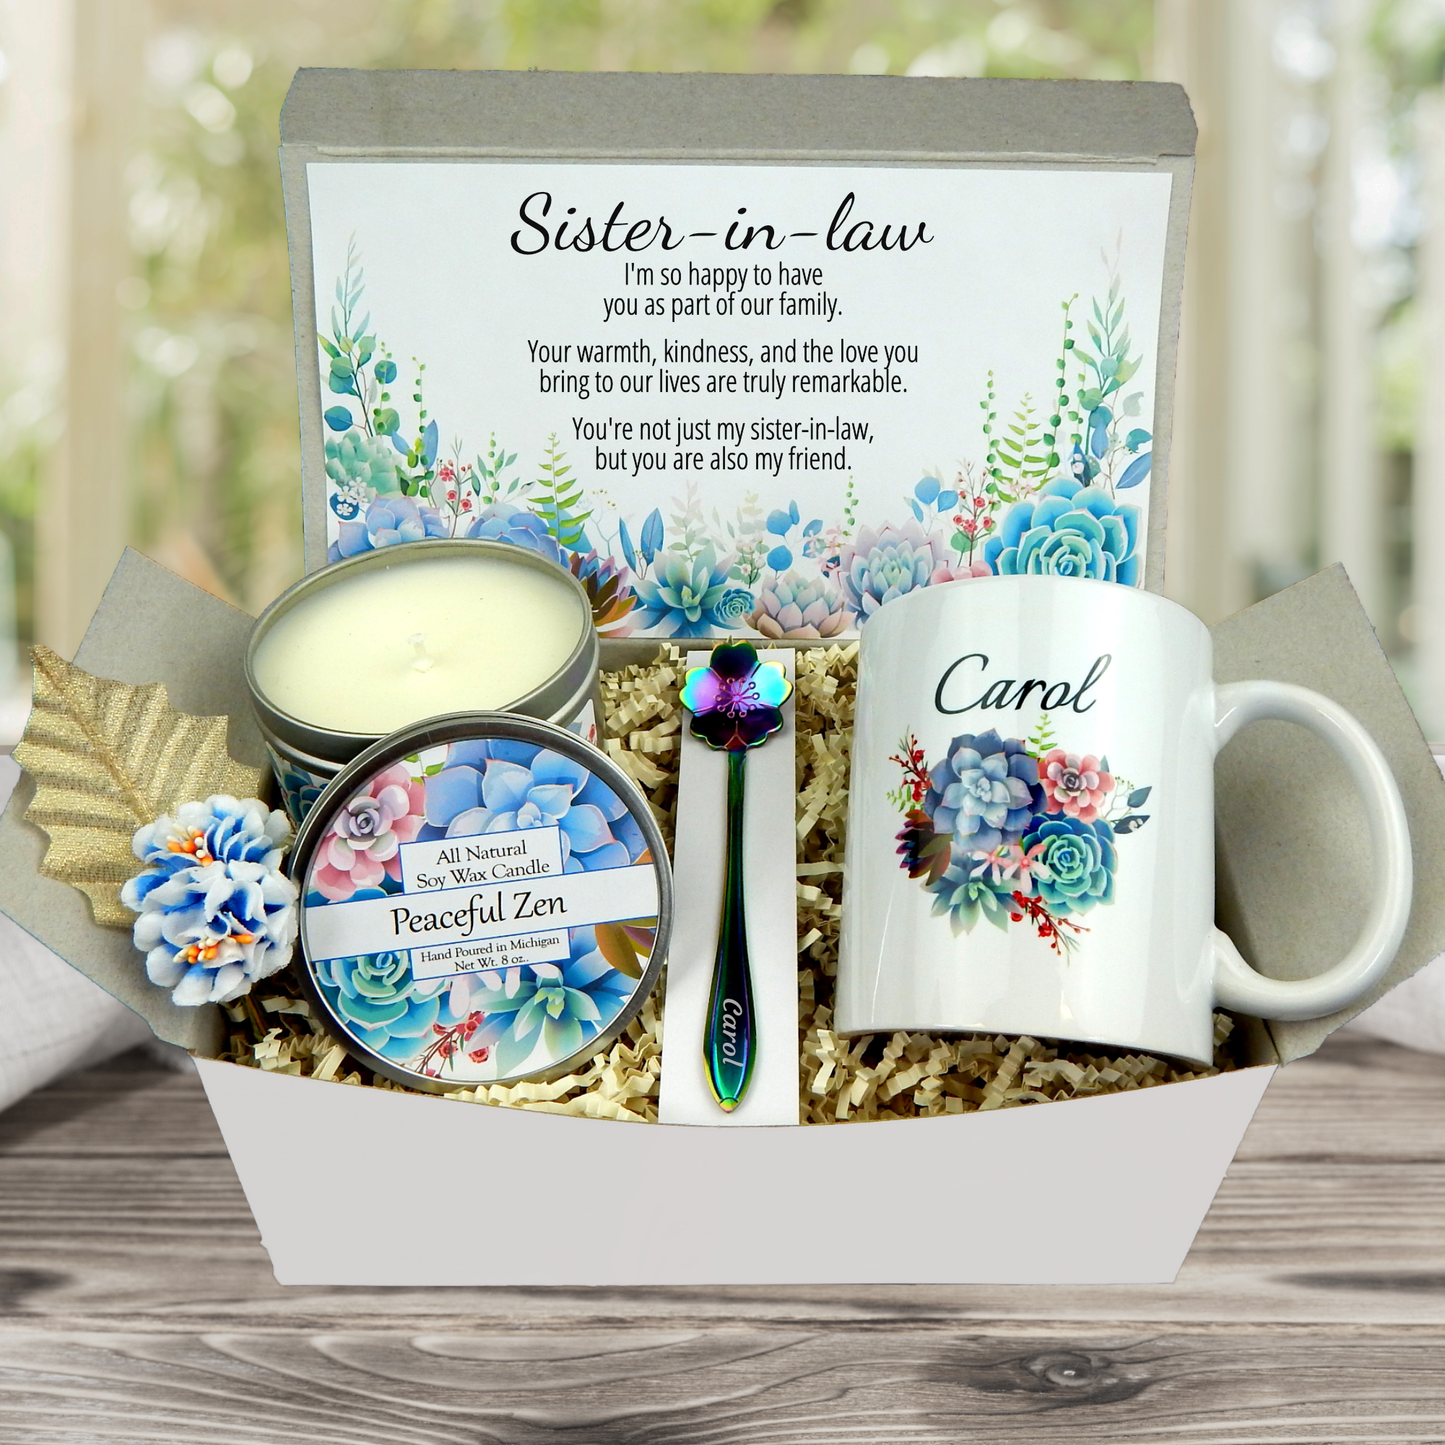 Sister-In-Law Gift Basket with Personalization